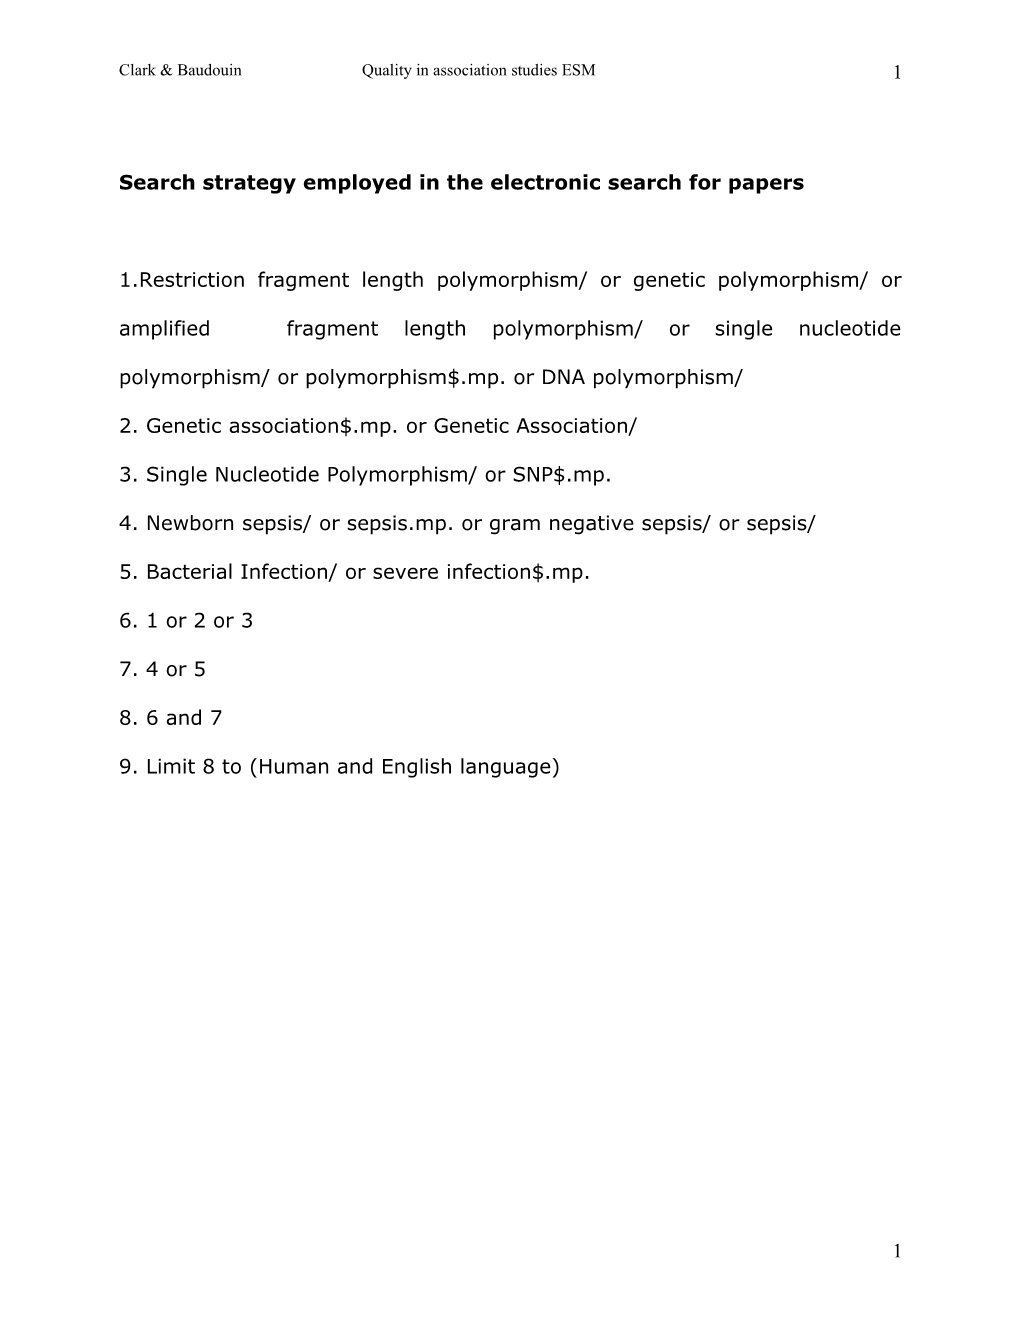 Search Strategy Employed in the Electronic Search for Papers